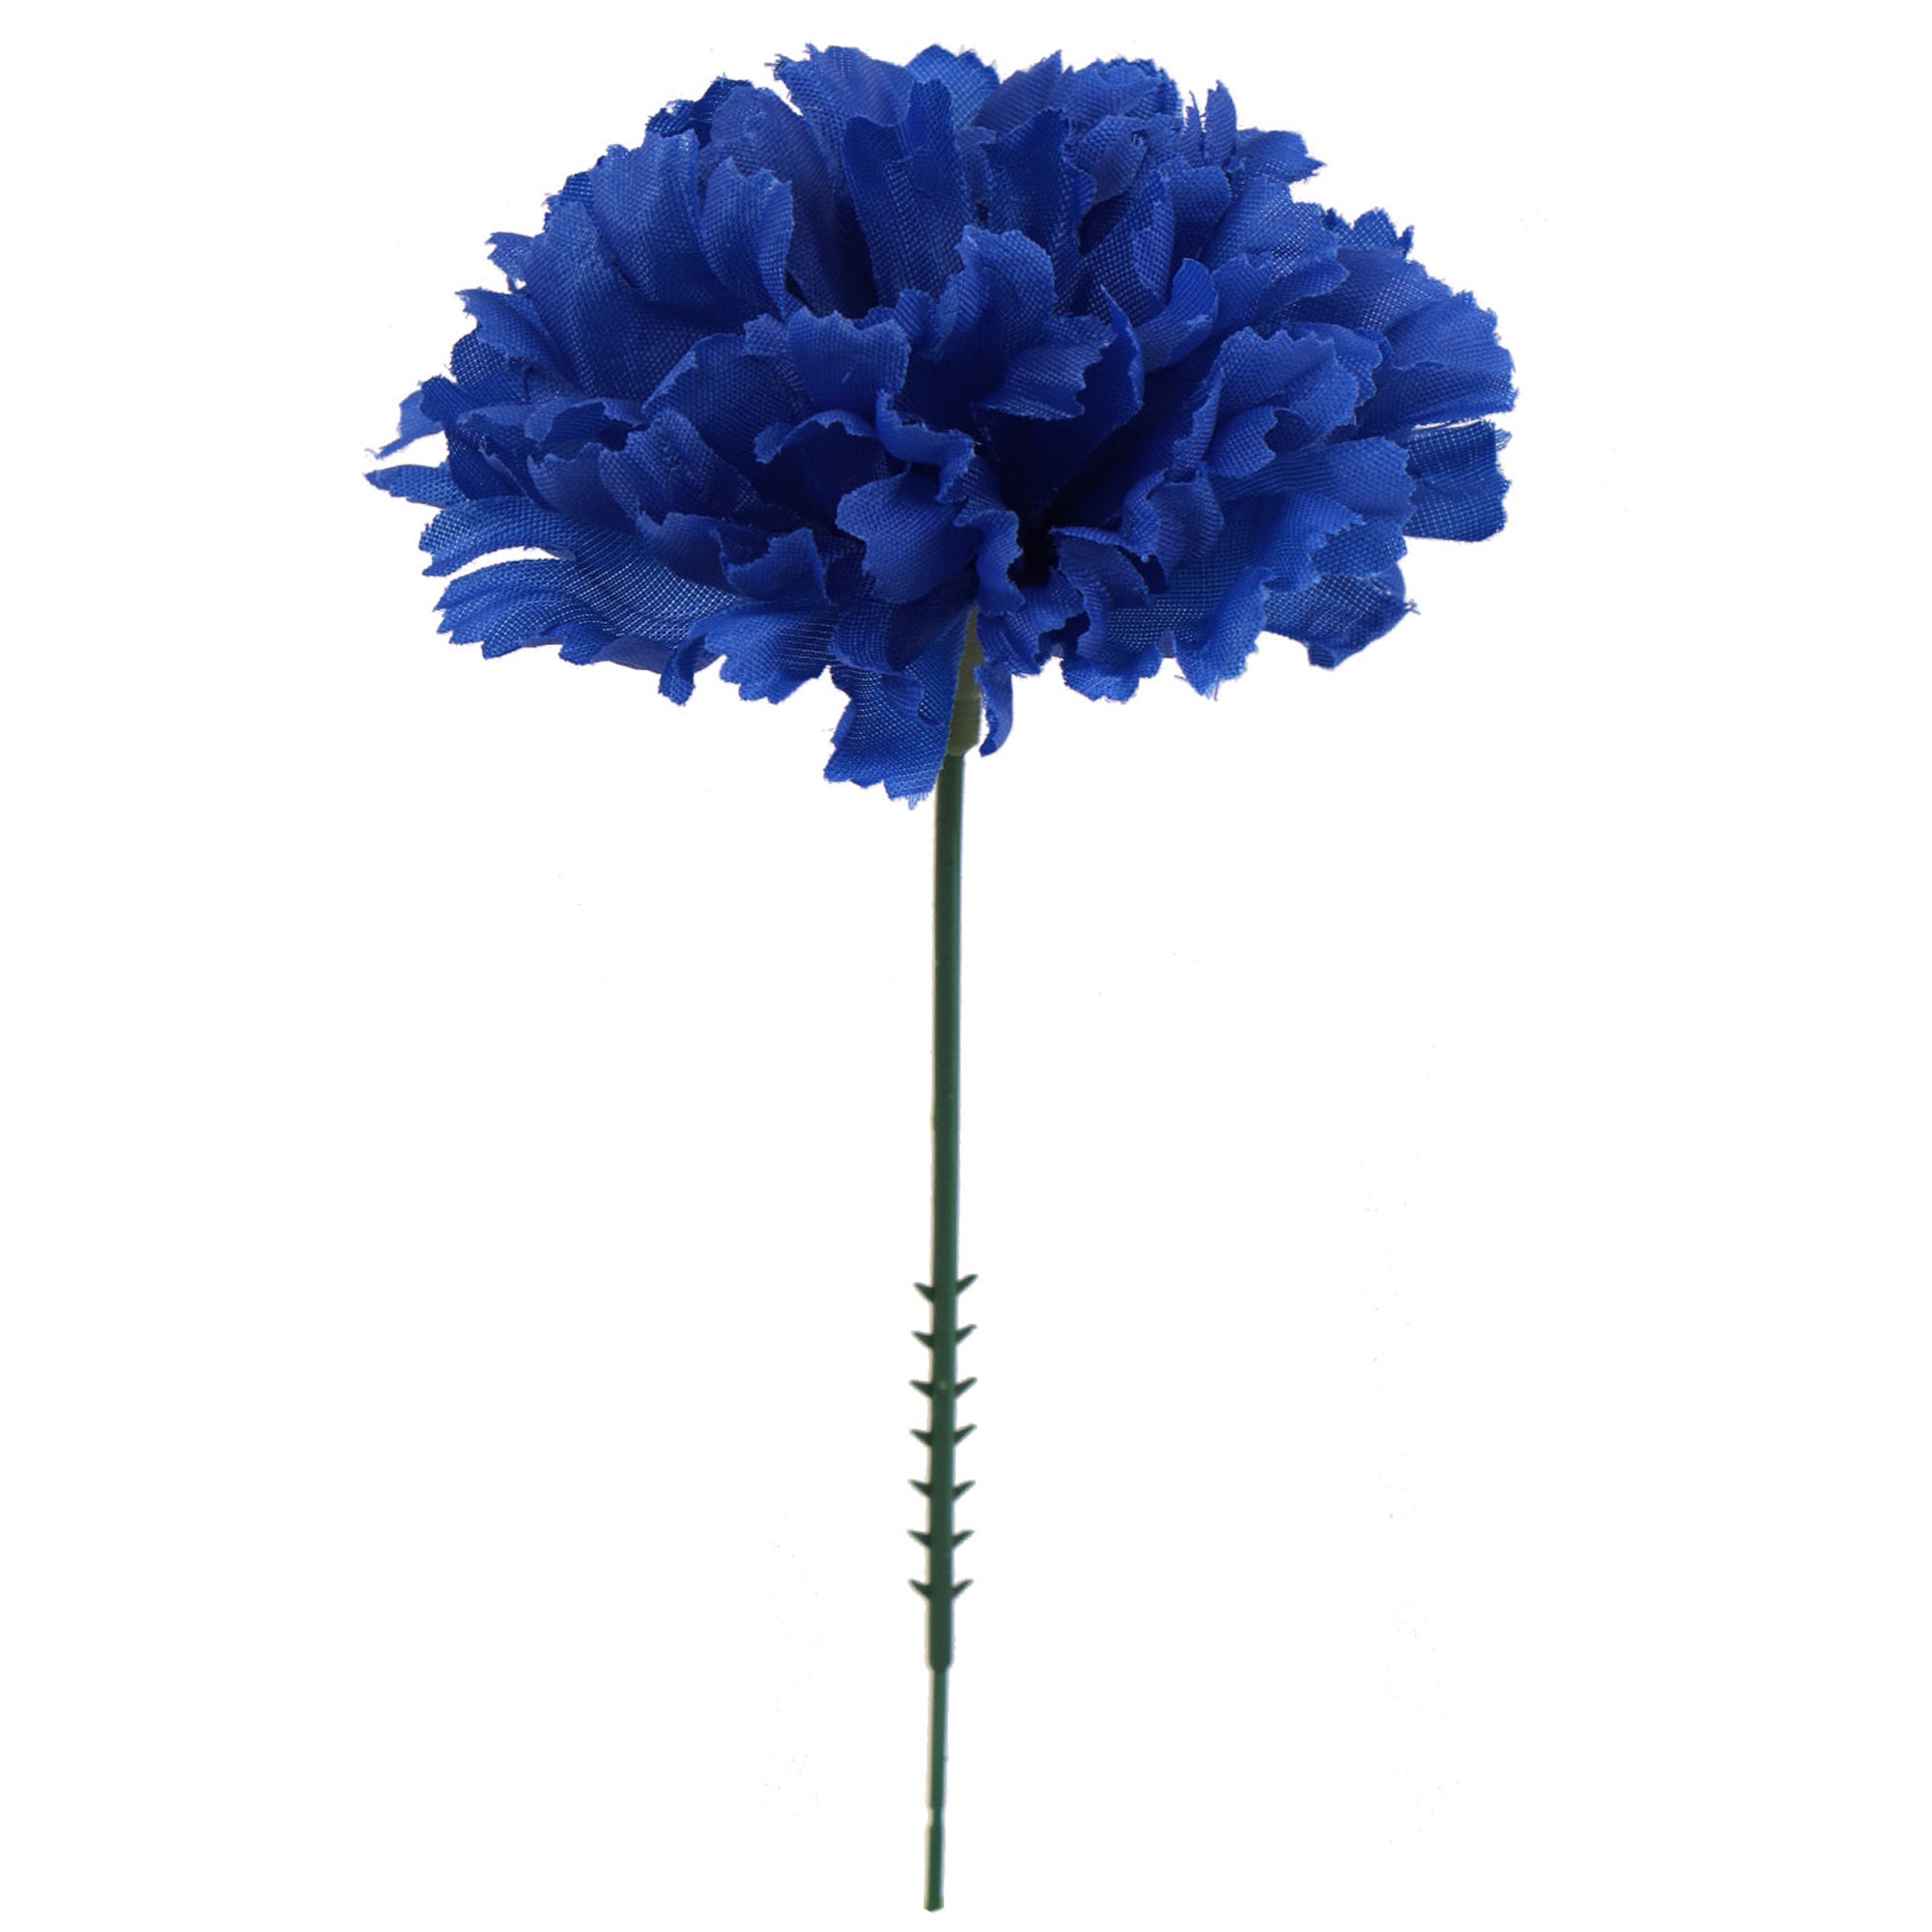 Stylish Royal Blue 4" Dia Carnation Pick - Striking Faux Flower for Home Decor, Weddings & Events - Dazzling Silk Floral Accent